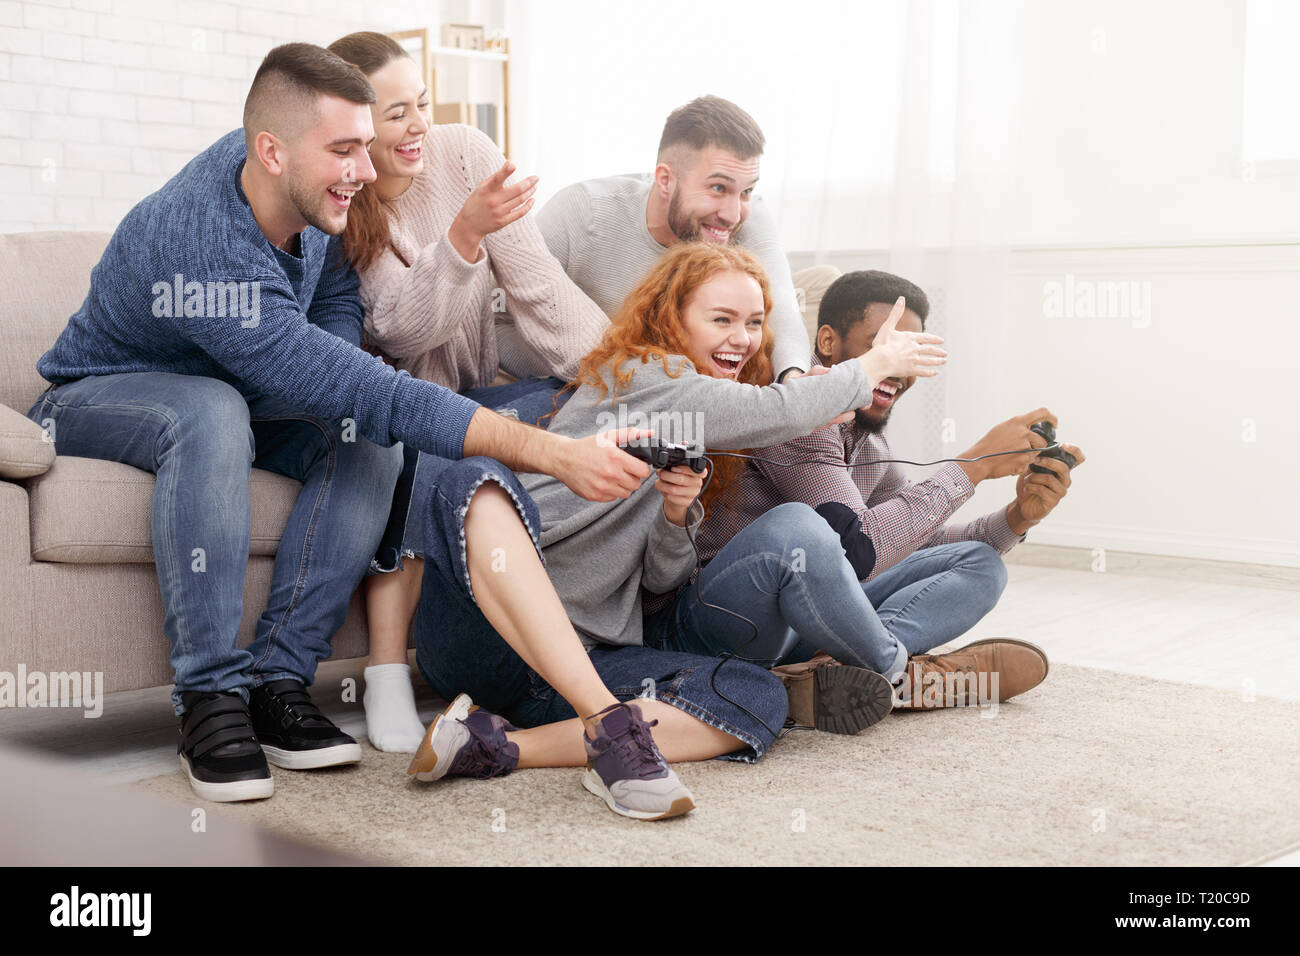 Students having fun, playing video games online Stock Photo